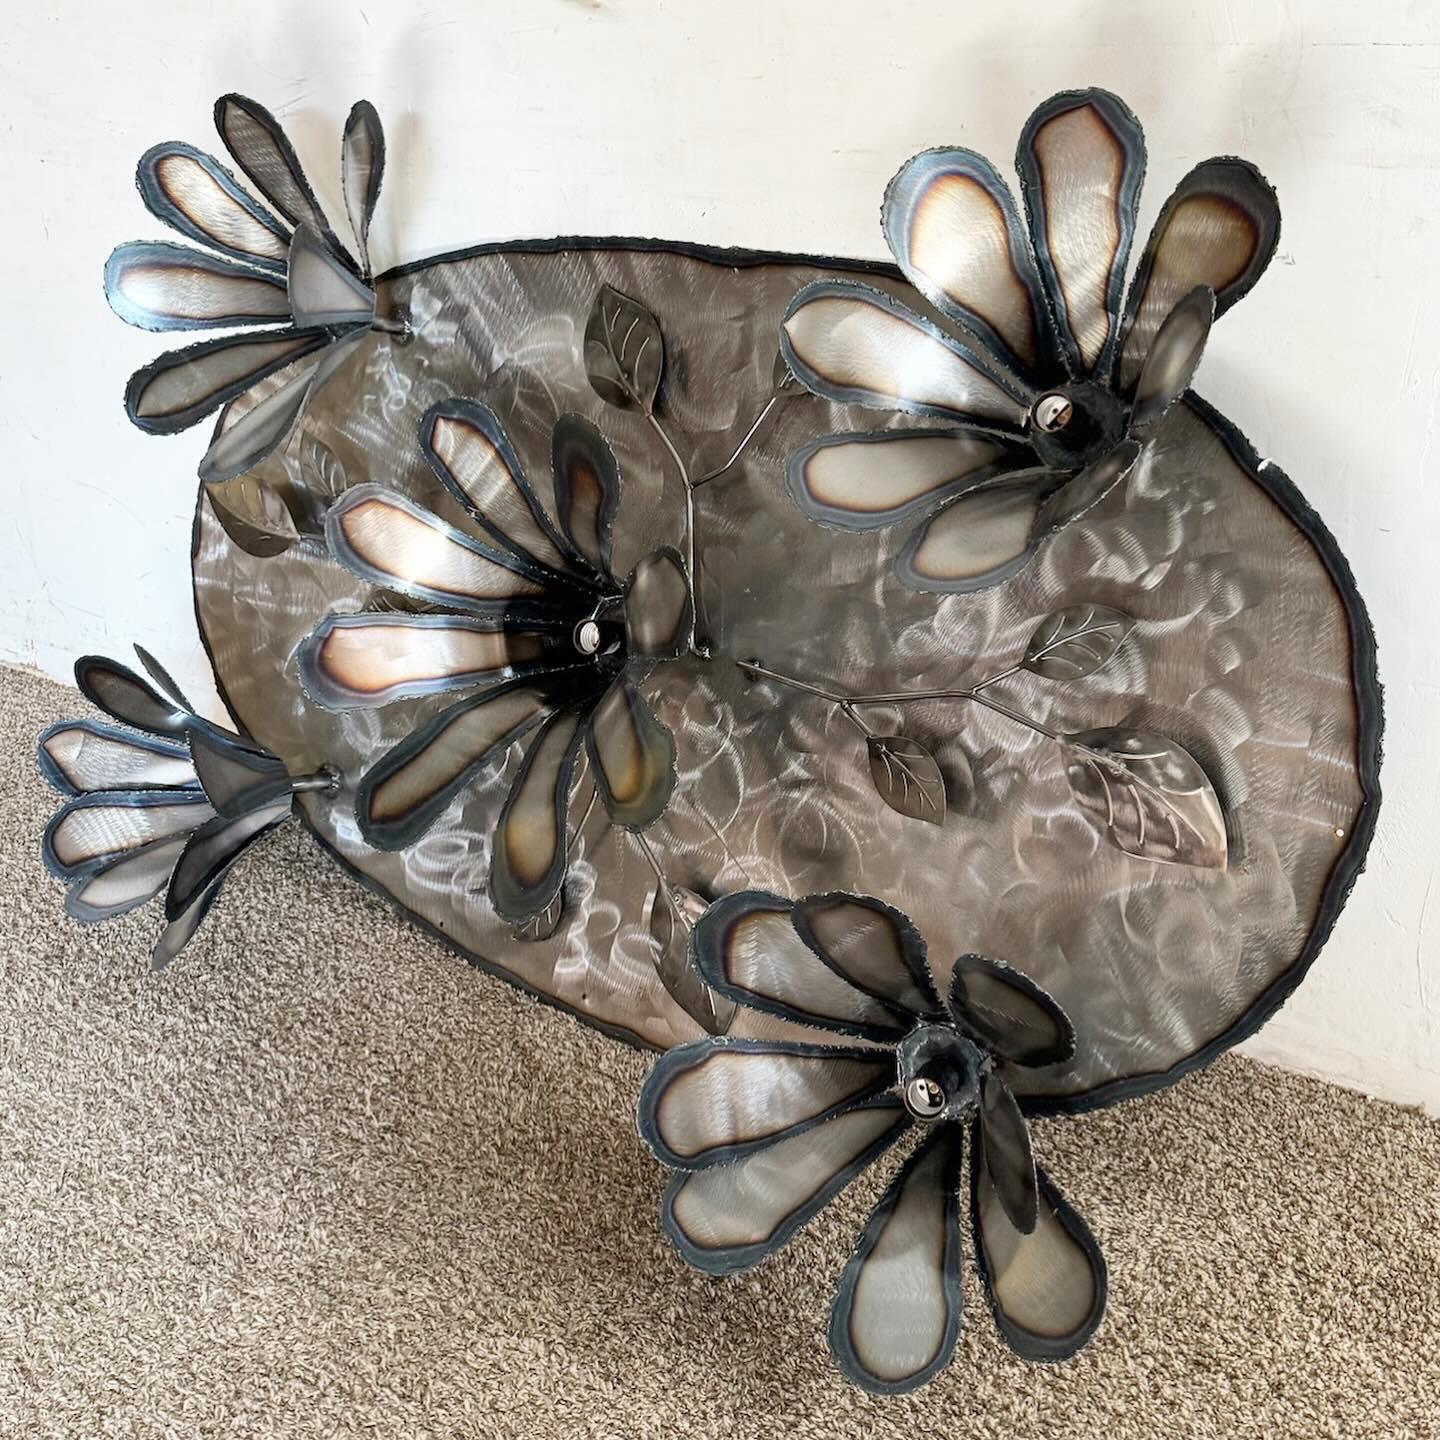 The Vintage Metal Flower Mounted Lamp Weld Art is a unique fusion of art and functionality. Crafted with metal flowers welded together, it showcases intricate design and rustic charm. Ideal for adding whimsy and creativity, this lamp serves as both